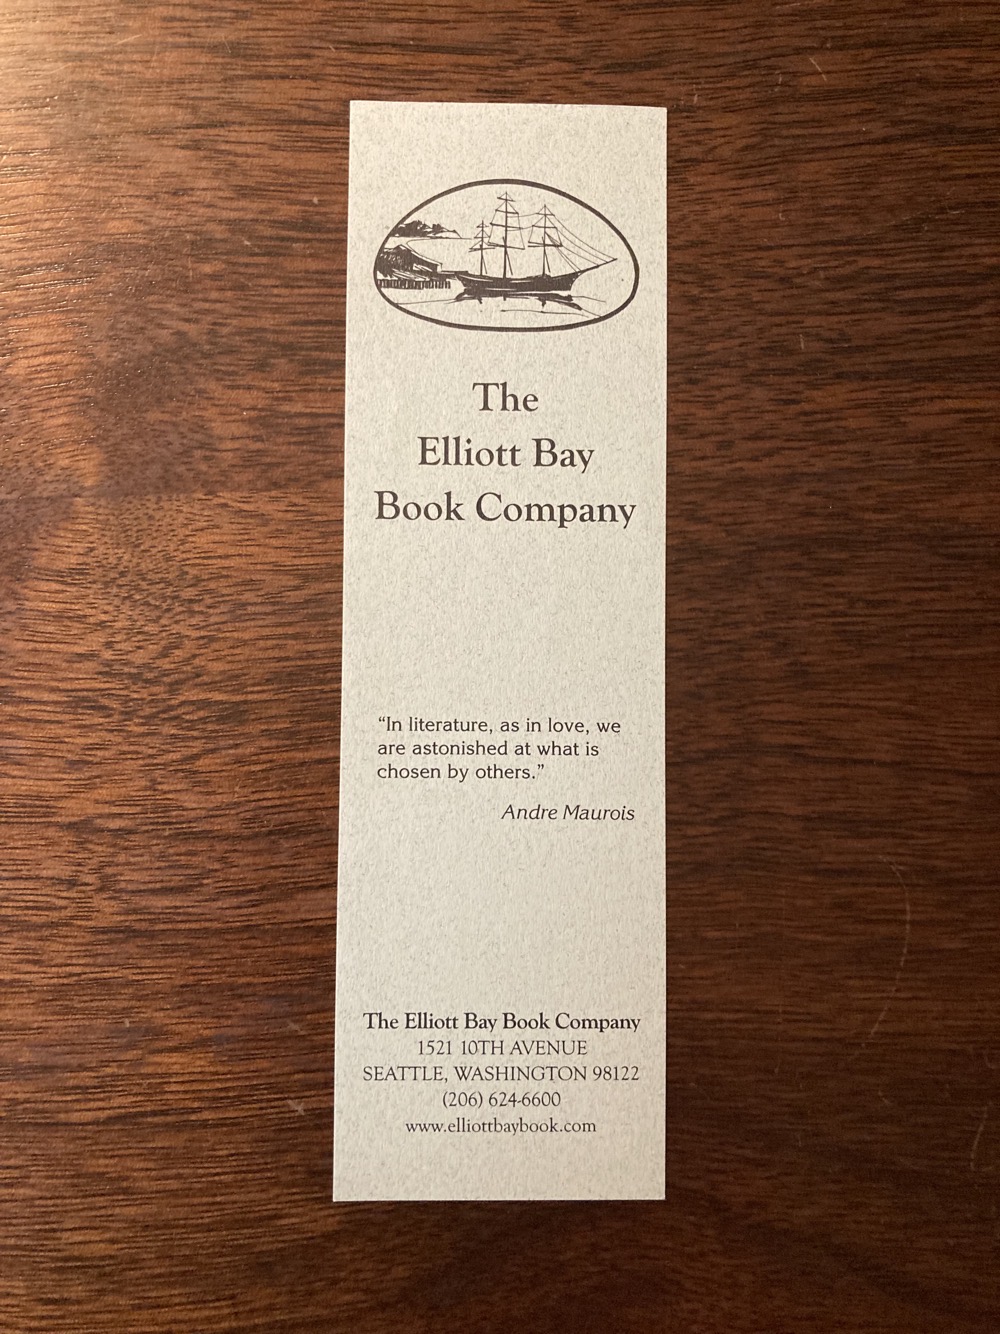 A bookmark with a drawing of an old three-mast schooner at the top. Below, a quote from Andre Maurois: In literature, as in love, we are astonished at what is chosen by others.